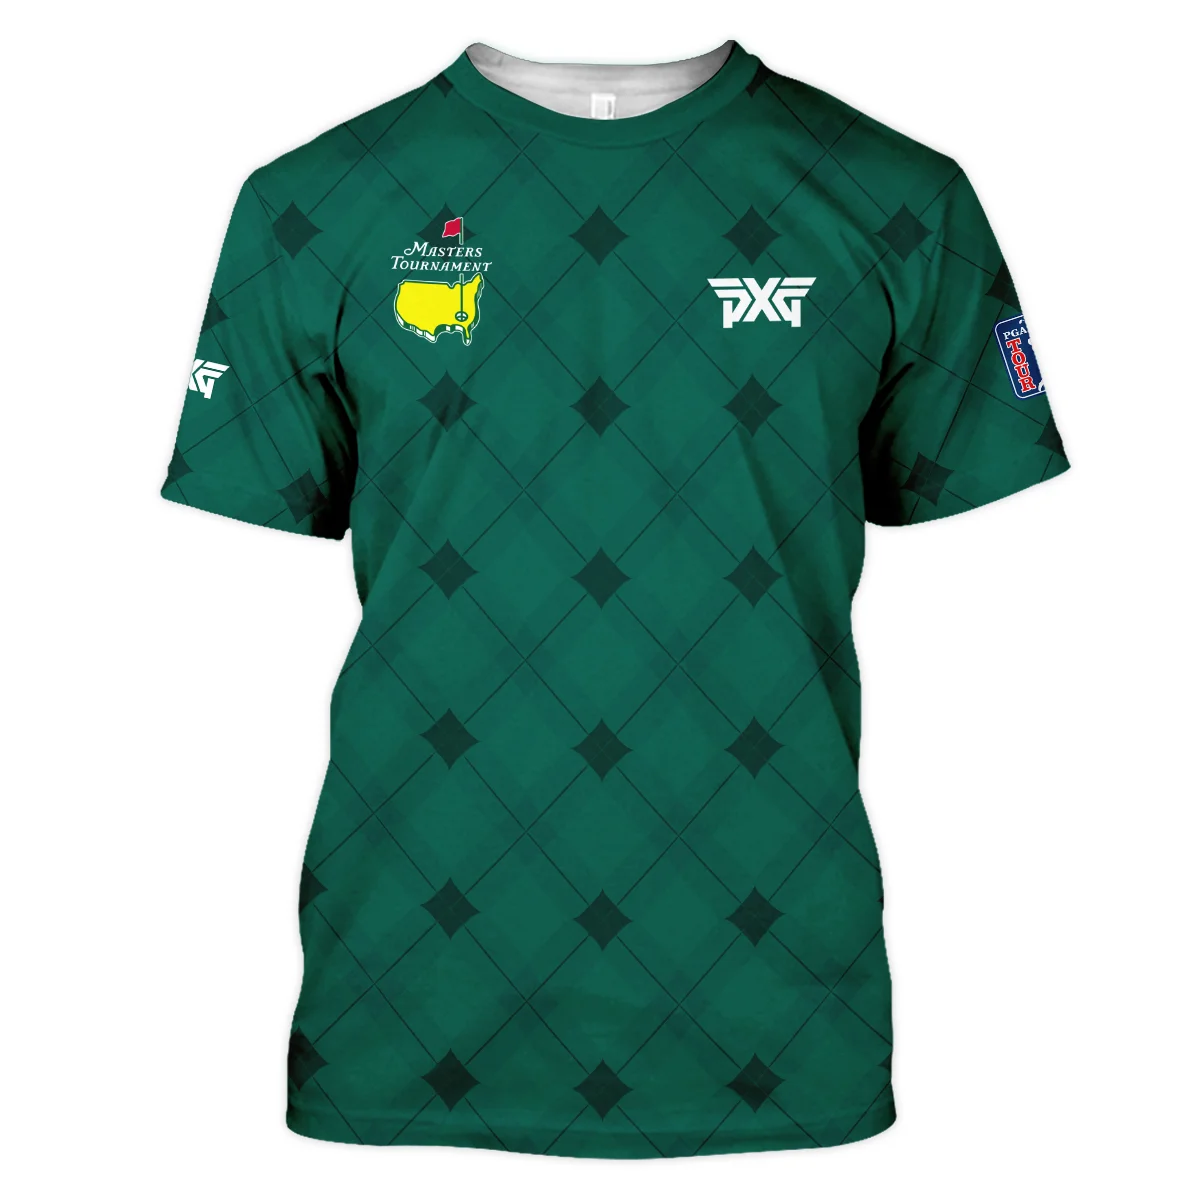 Golf Masters Tournament Green Argyle Pattern Polo Shirt Style Classic Polo Shirt For Men